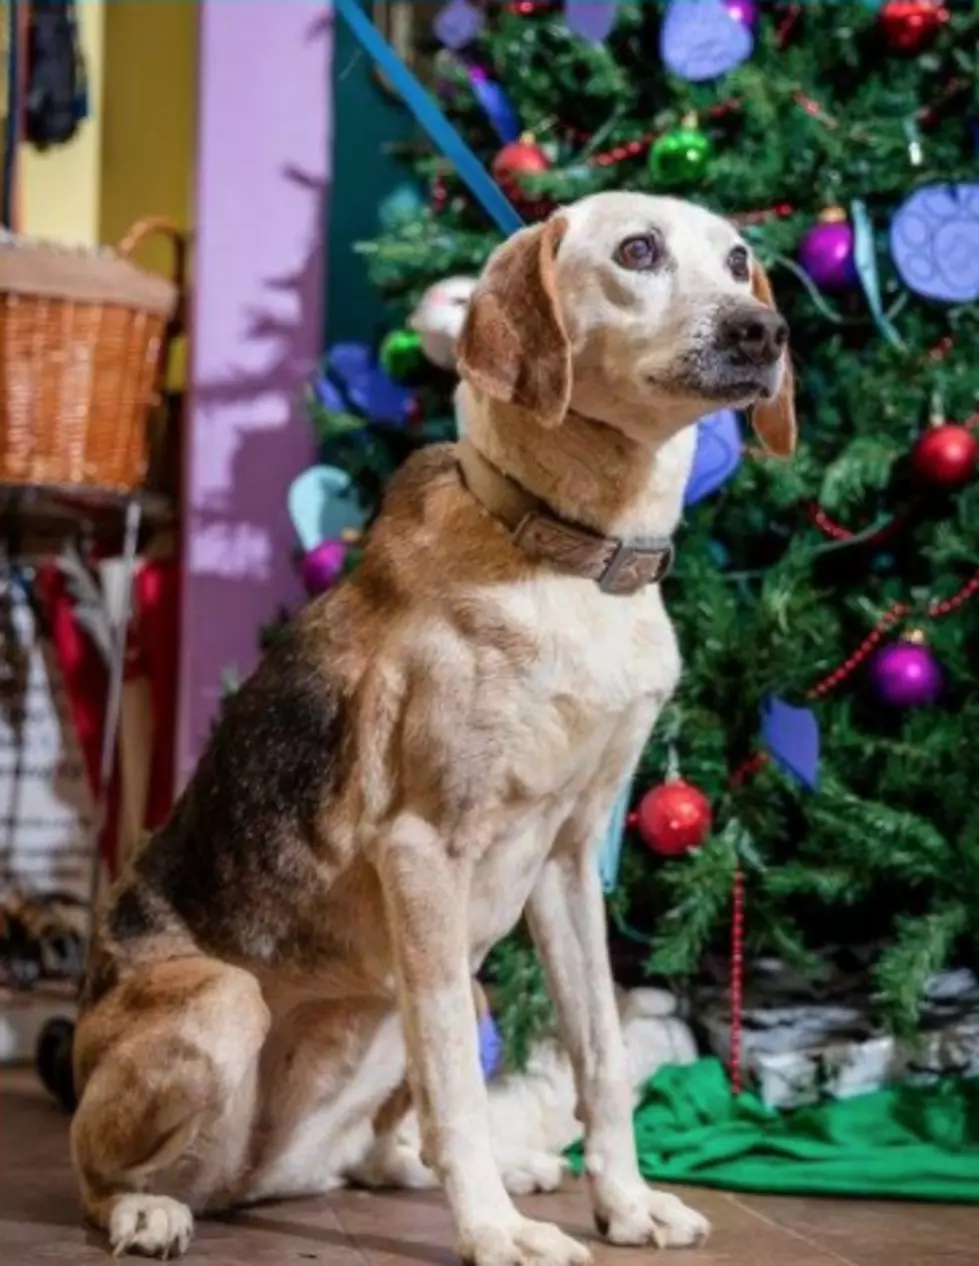 Senior Dog Needs Home To Ride Out Her Golden Years!